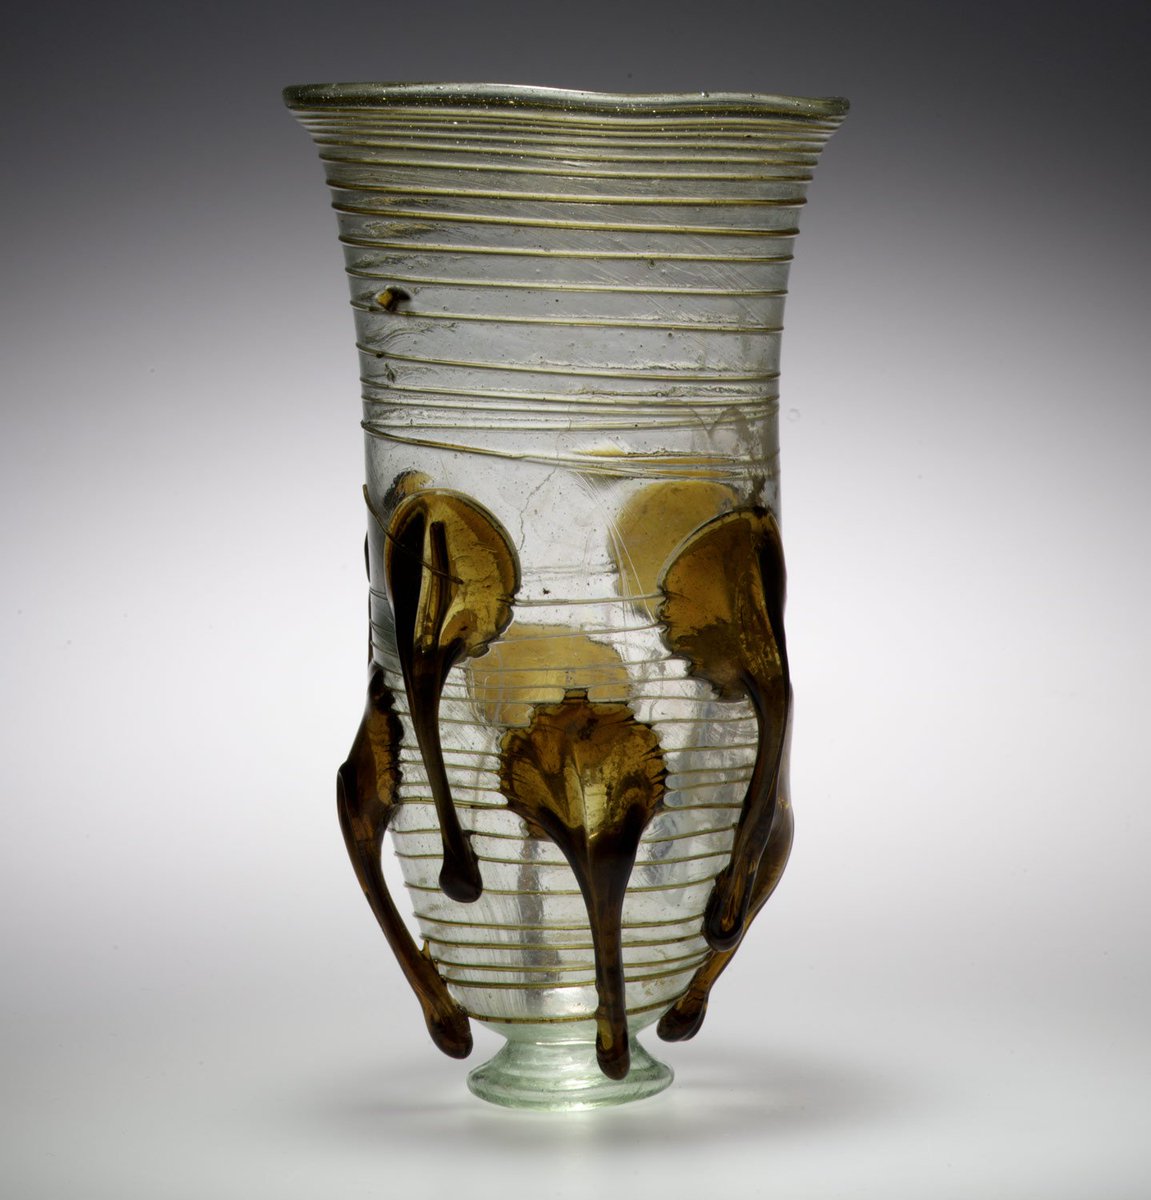 A 5th- to 6th-century Frankish claw beaker, found in Bellenberg-Vöhringen (Bavaria):  https://www.metmuseum.org/art/collection/search/468762